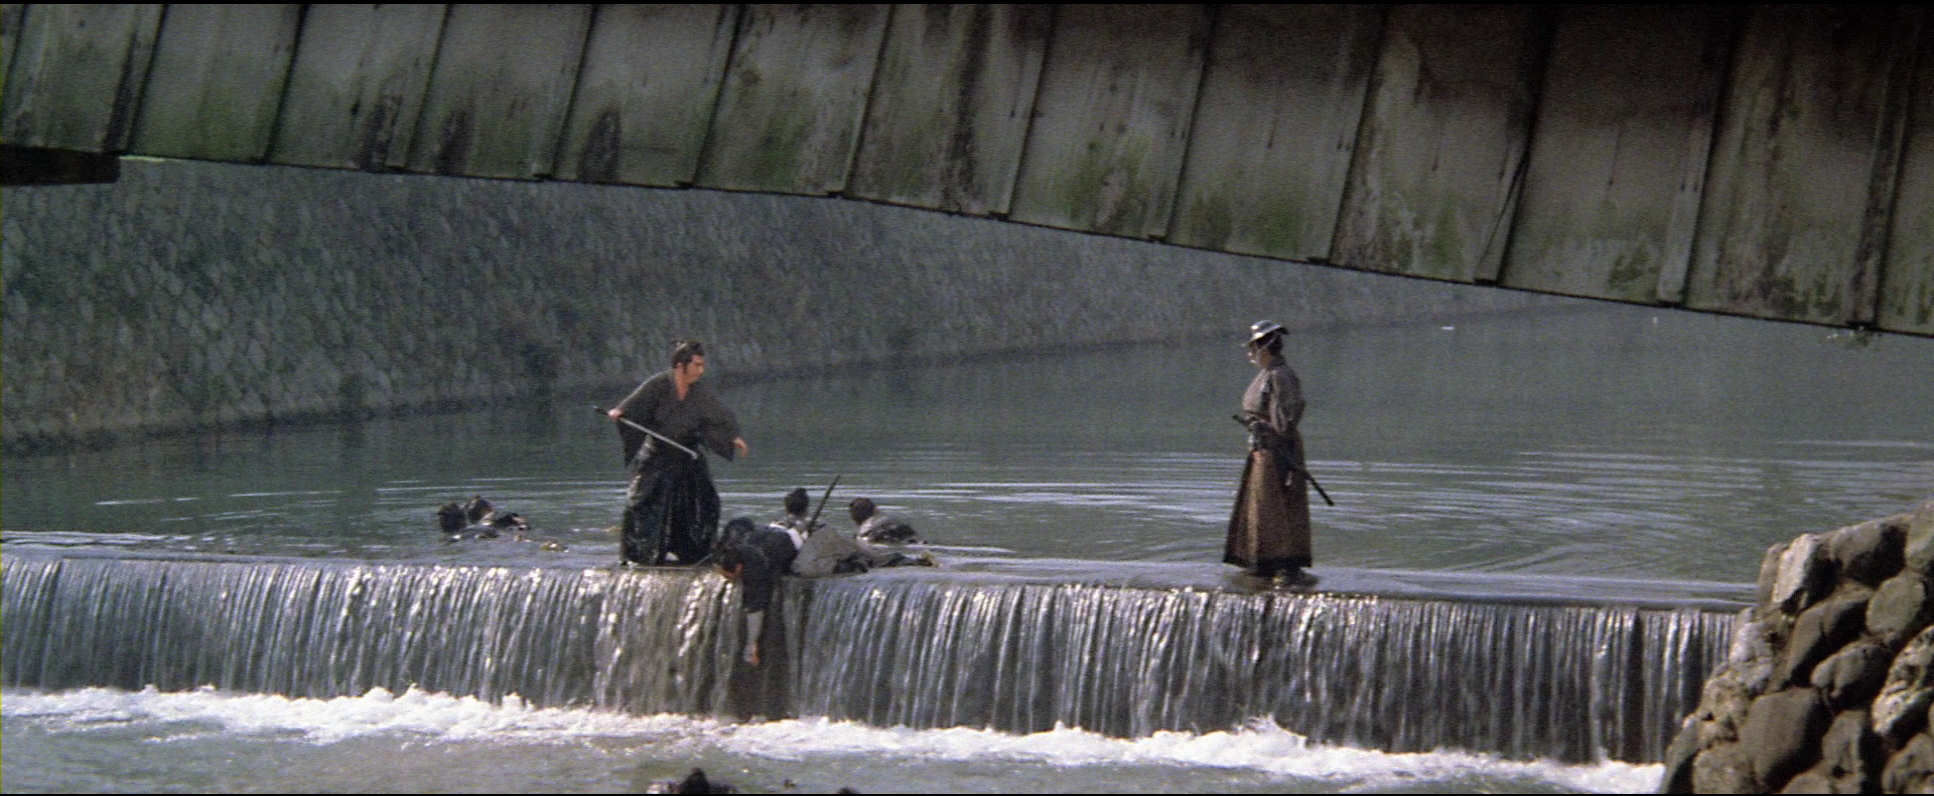 LONE WOLF AND CUB: SWORD OF VENGEANCE (1972)